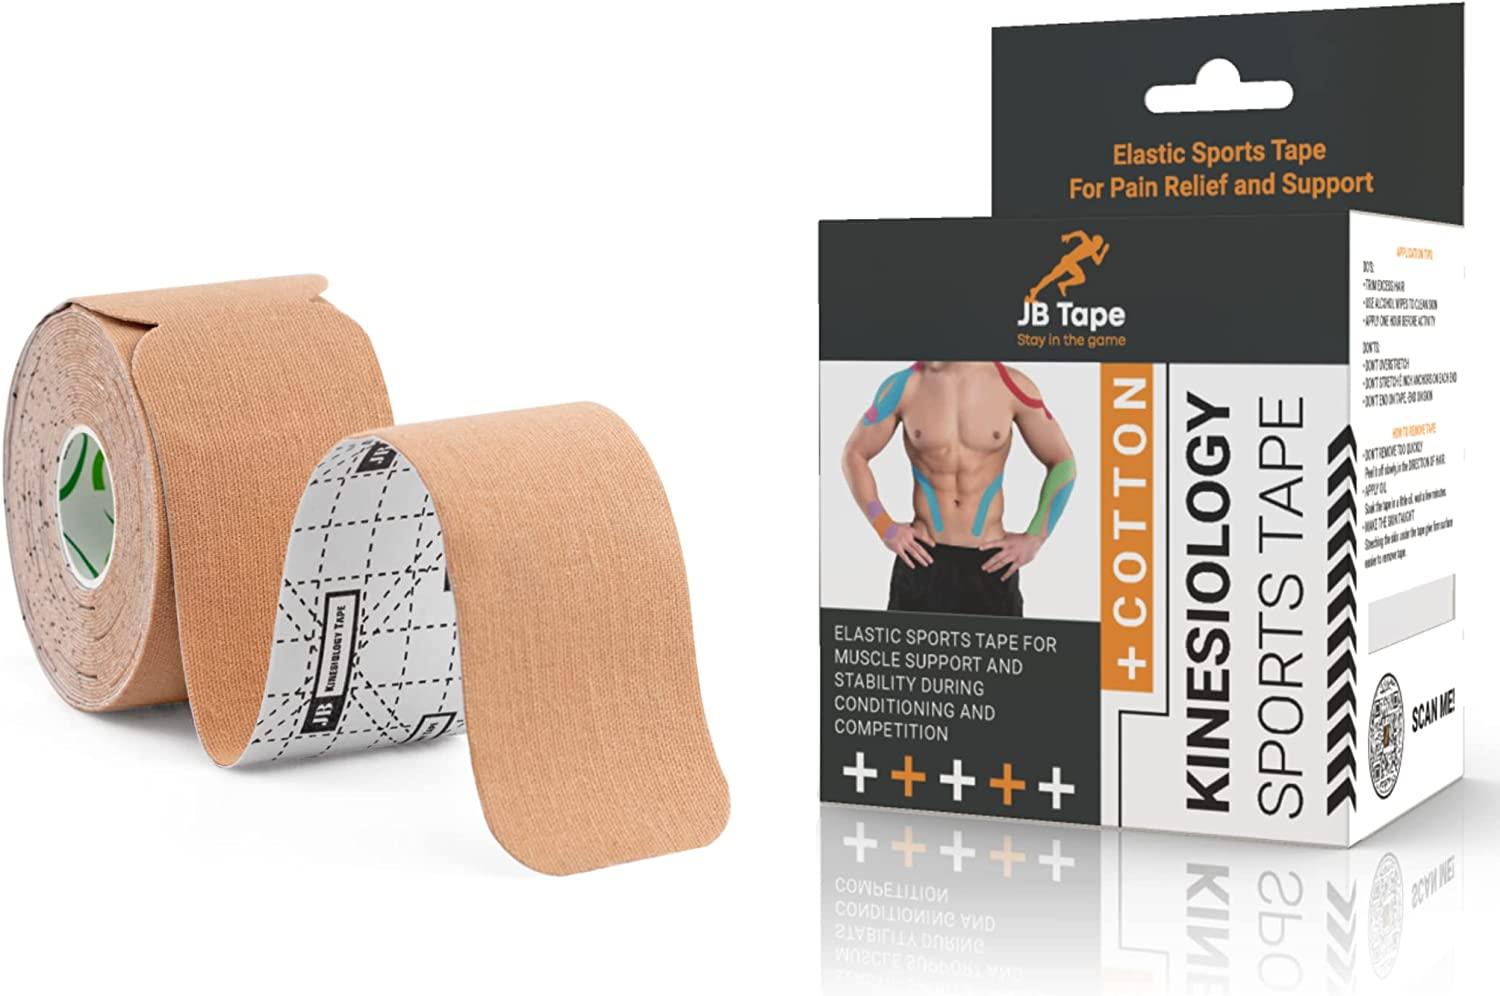 K-Tape for Me Precut Kinesiology Tape for Ankle Pain, 4 count